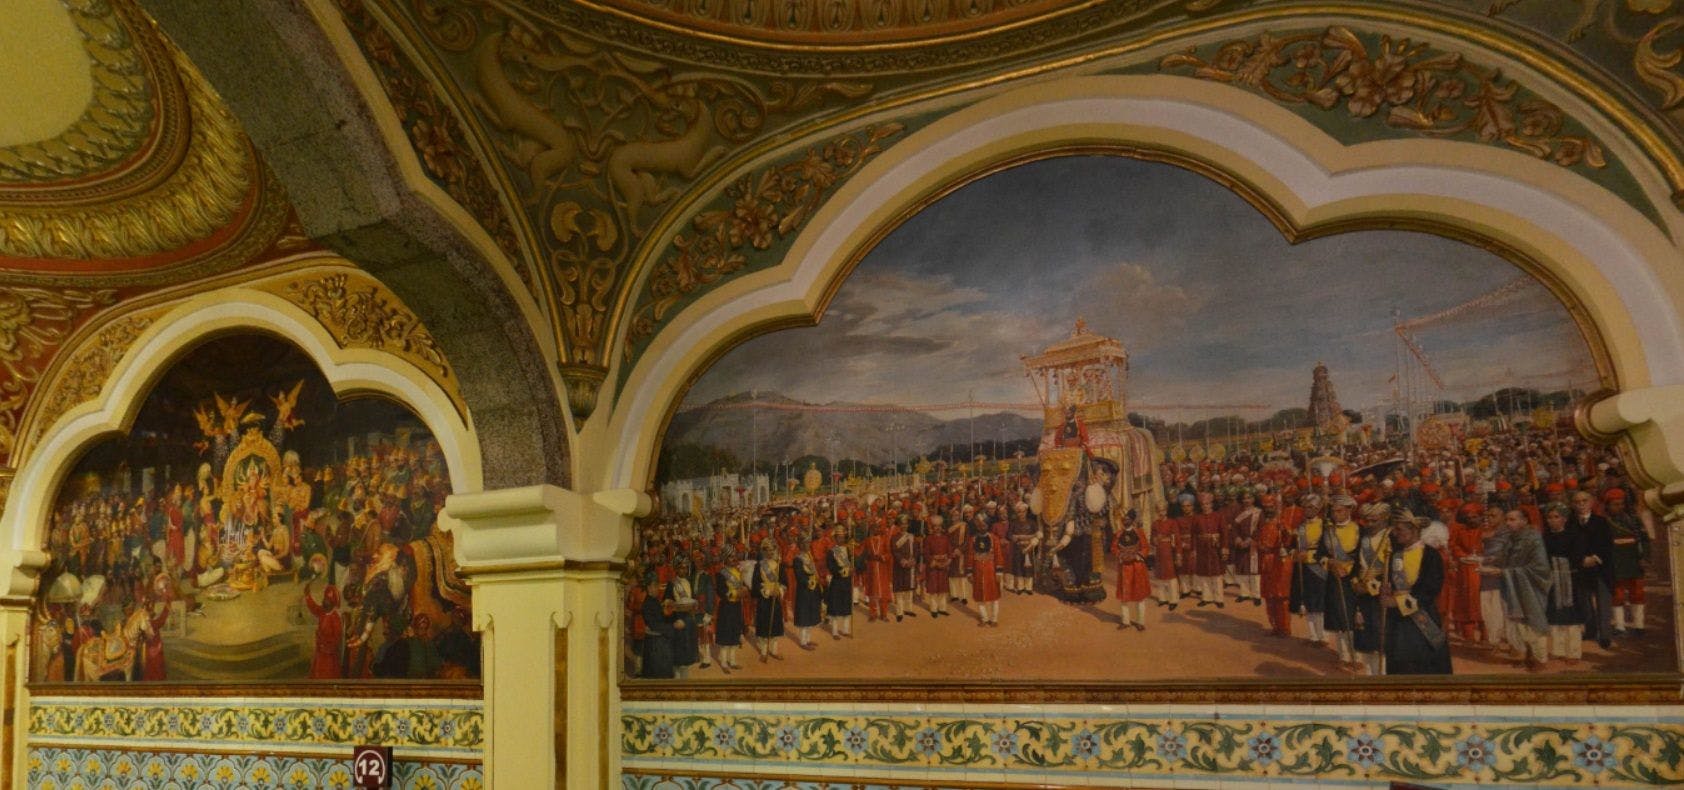 One of the paintings of the Dasara procession